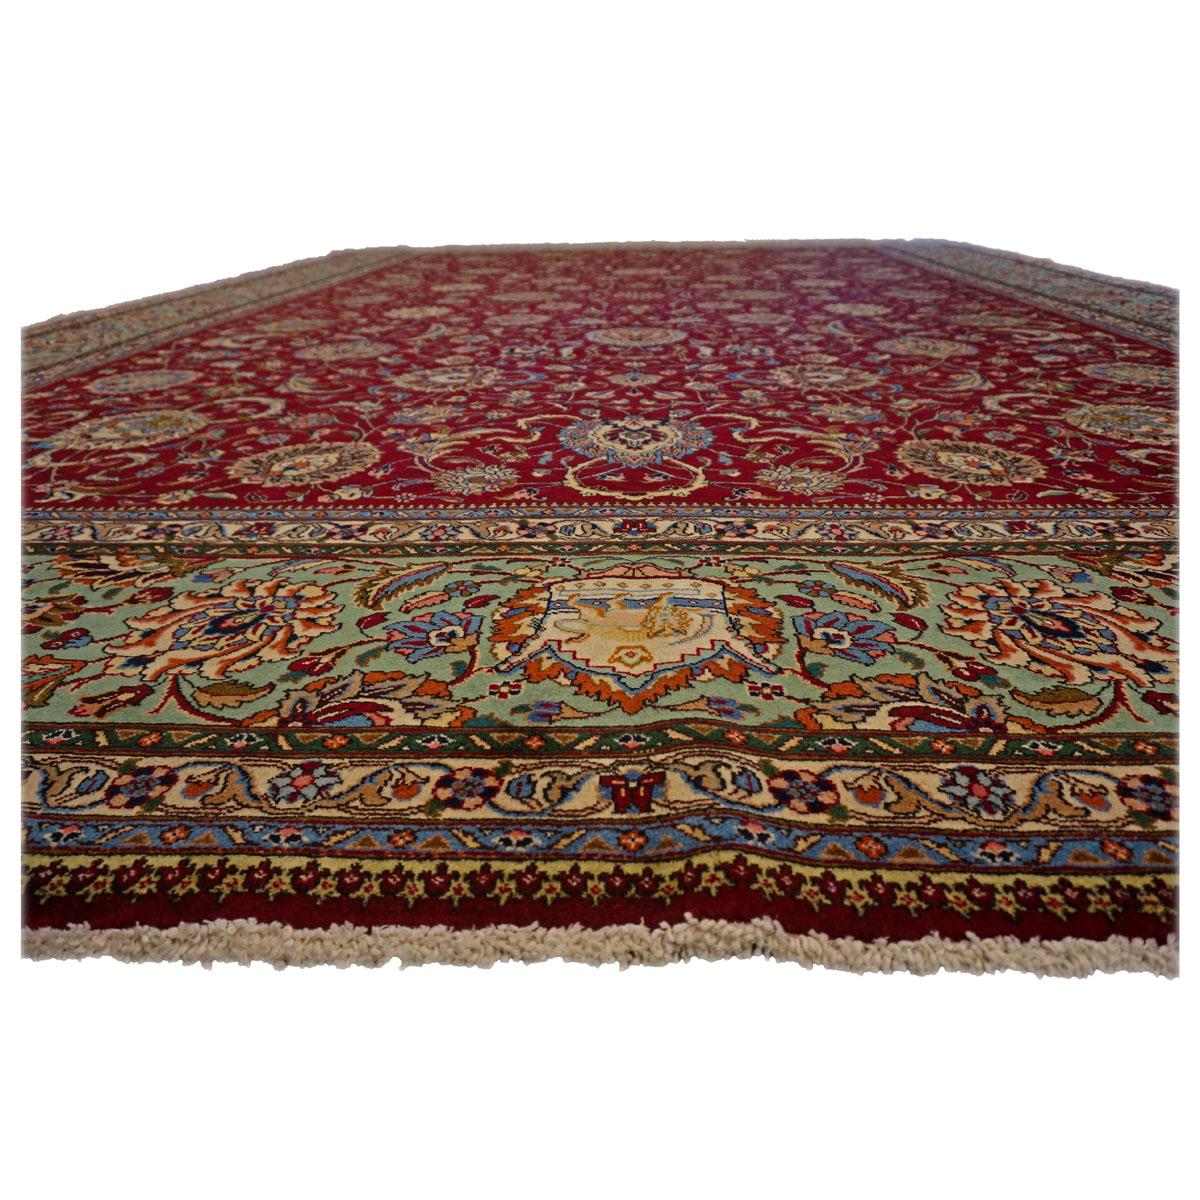 Mid-20th Century Antique 1940s Persian Tabriz Pahlavi 11x16 Red, Teal, & Ivory Handmade Area Rug For Sale